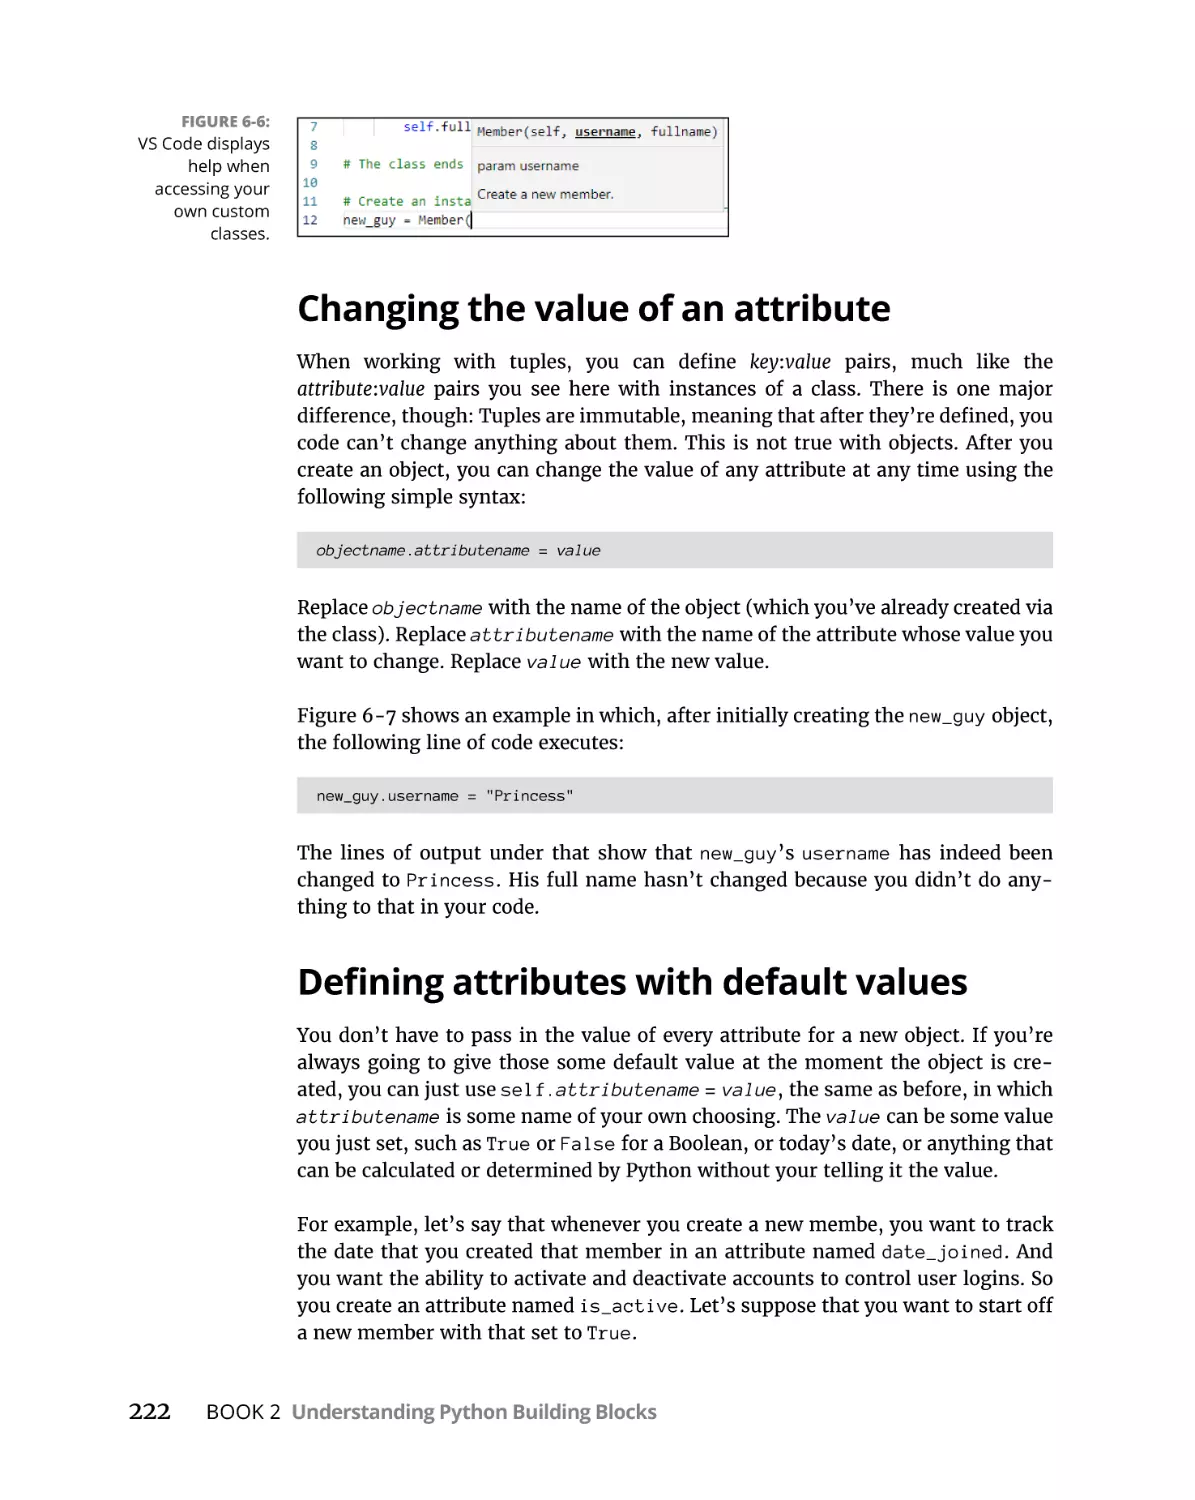 Changing the value of an attribute
Defining attributes with default values